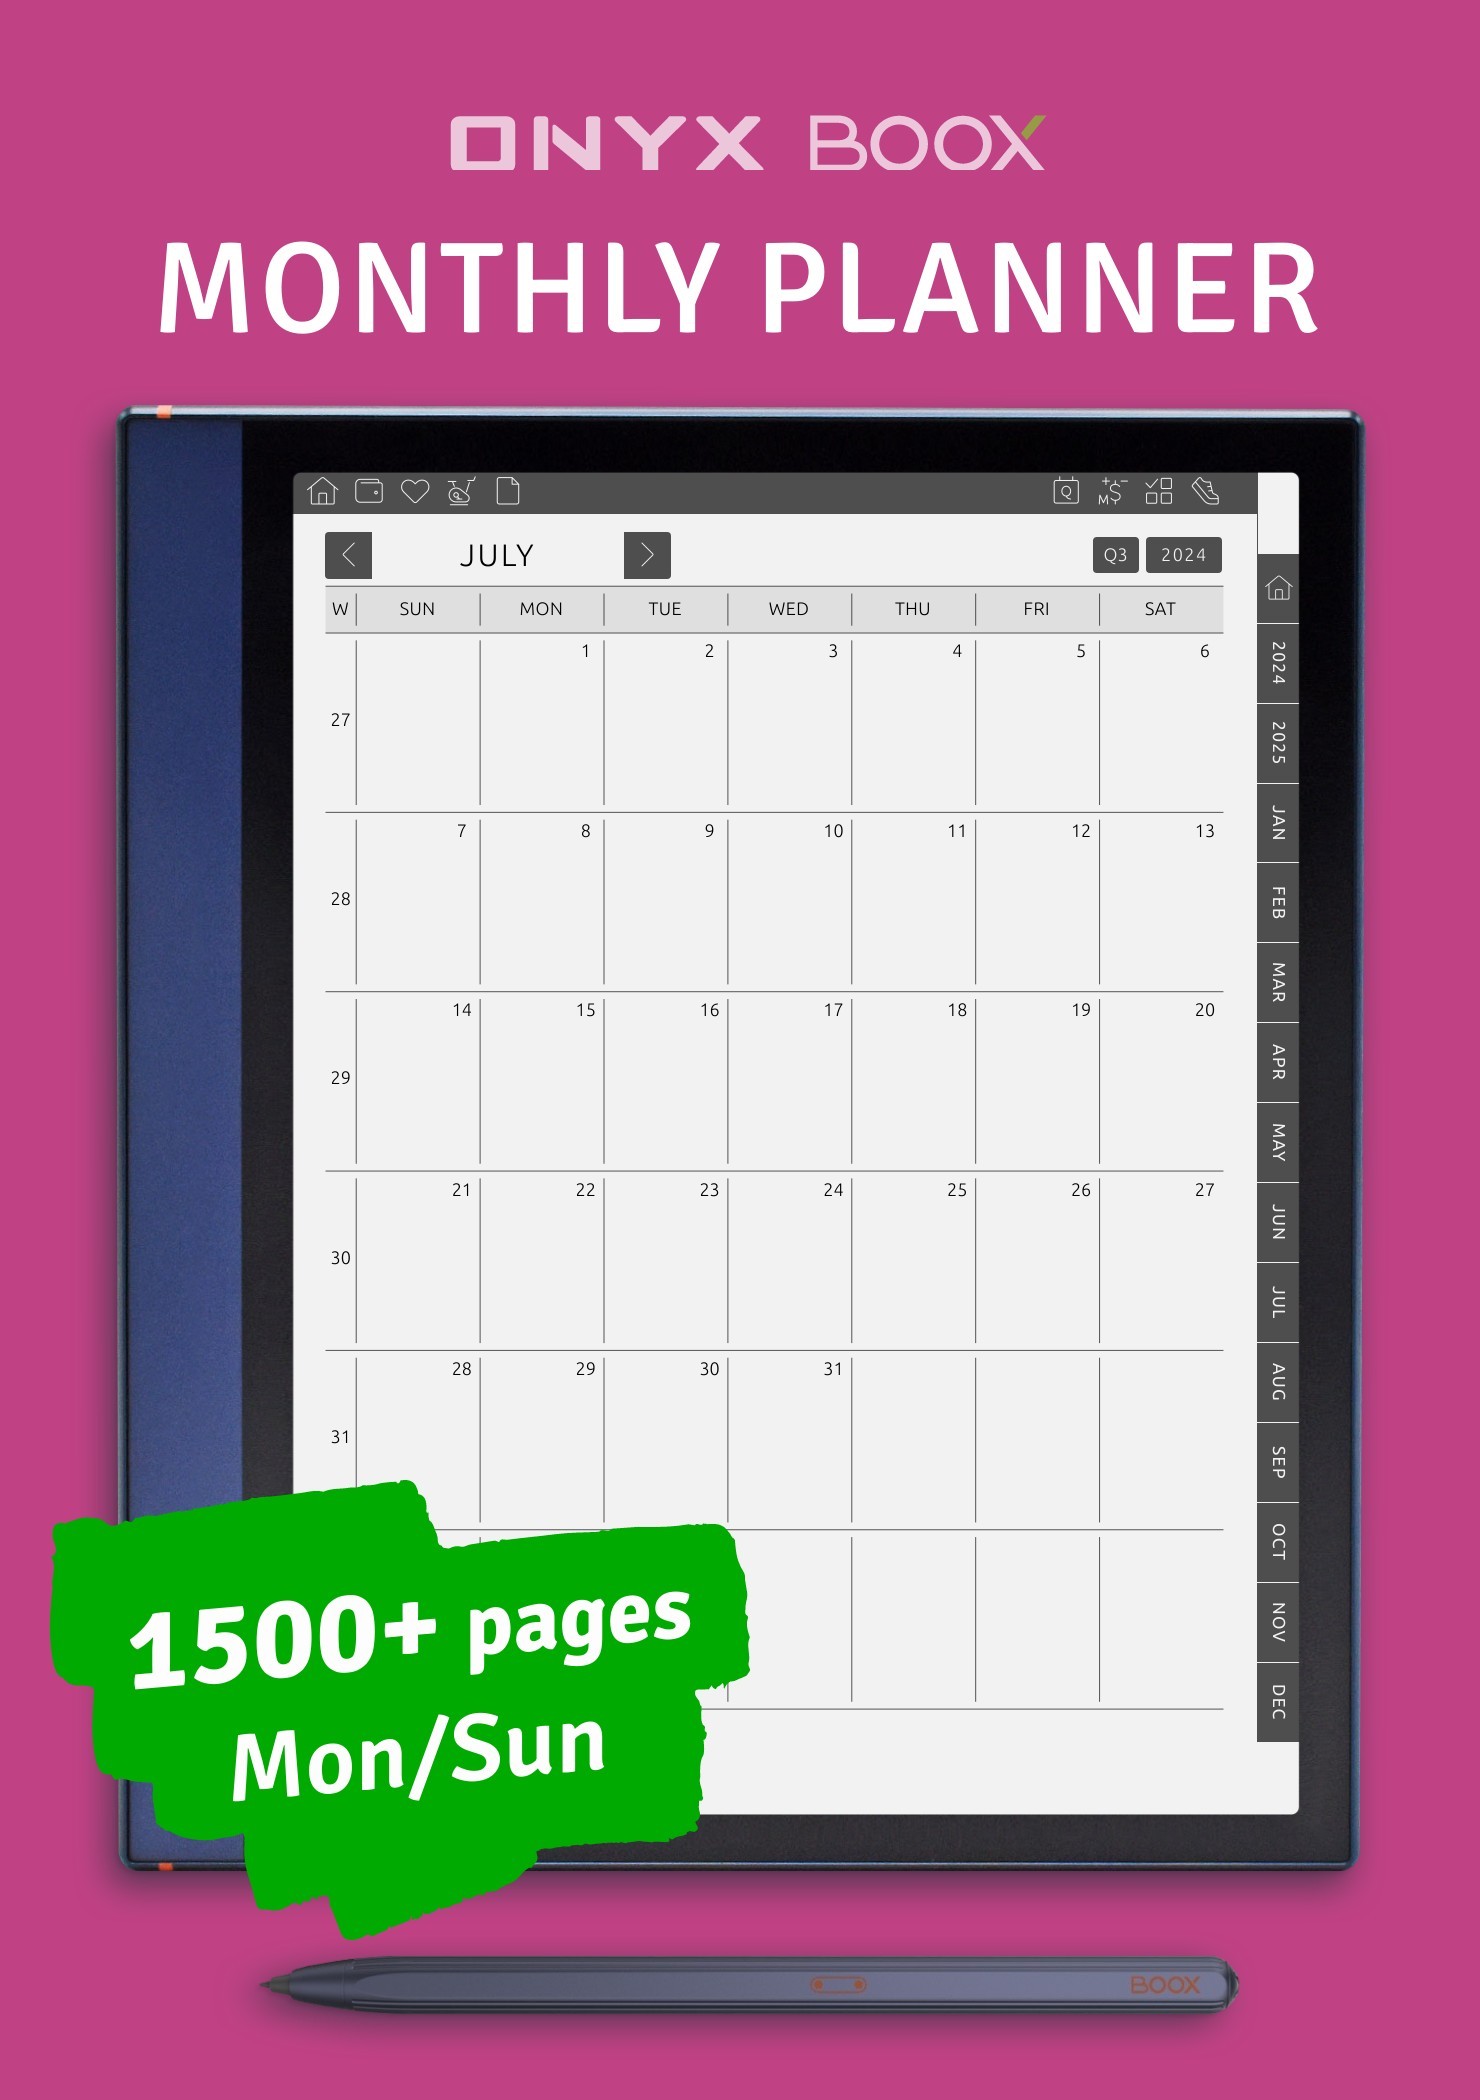 Download Onyx Boox Monthly Planner Hyperlinked PDF